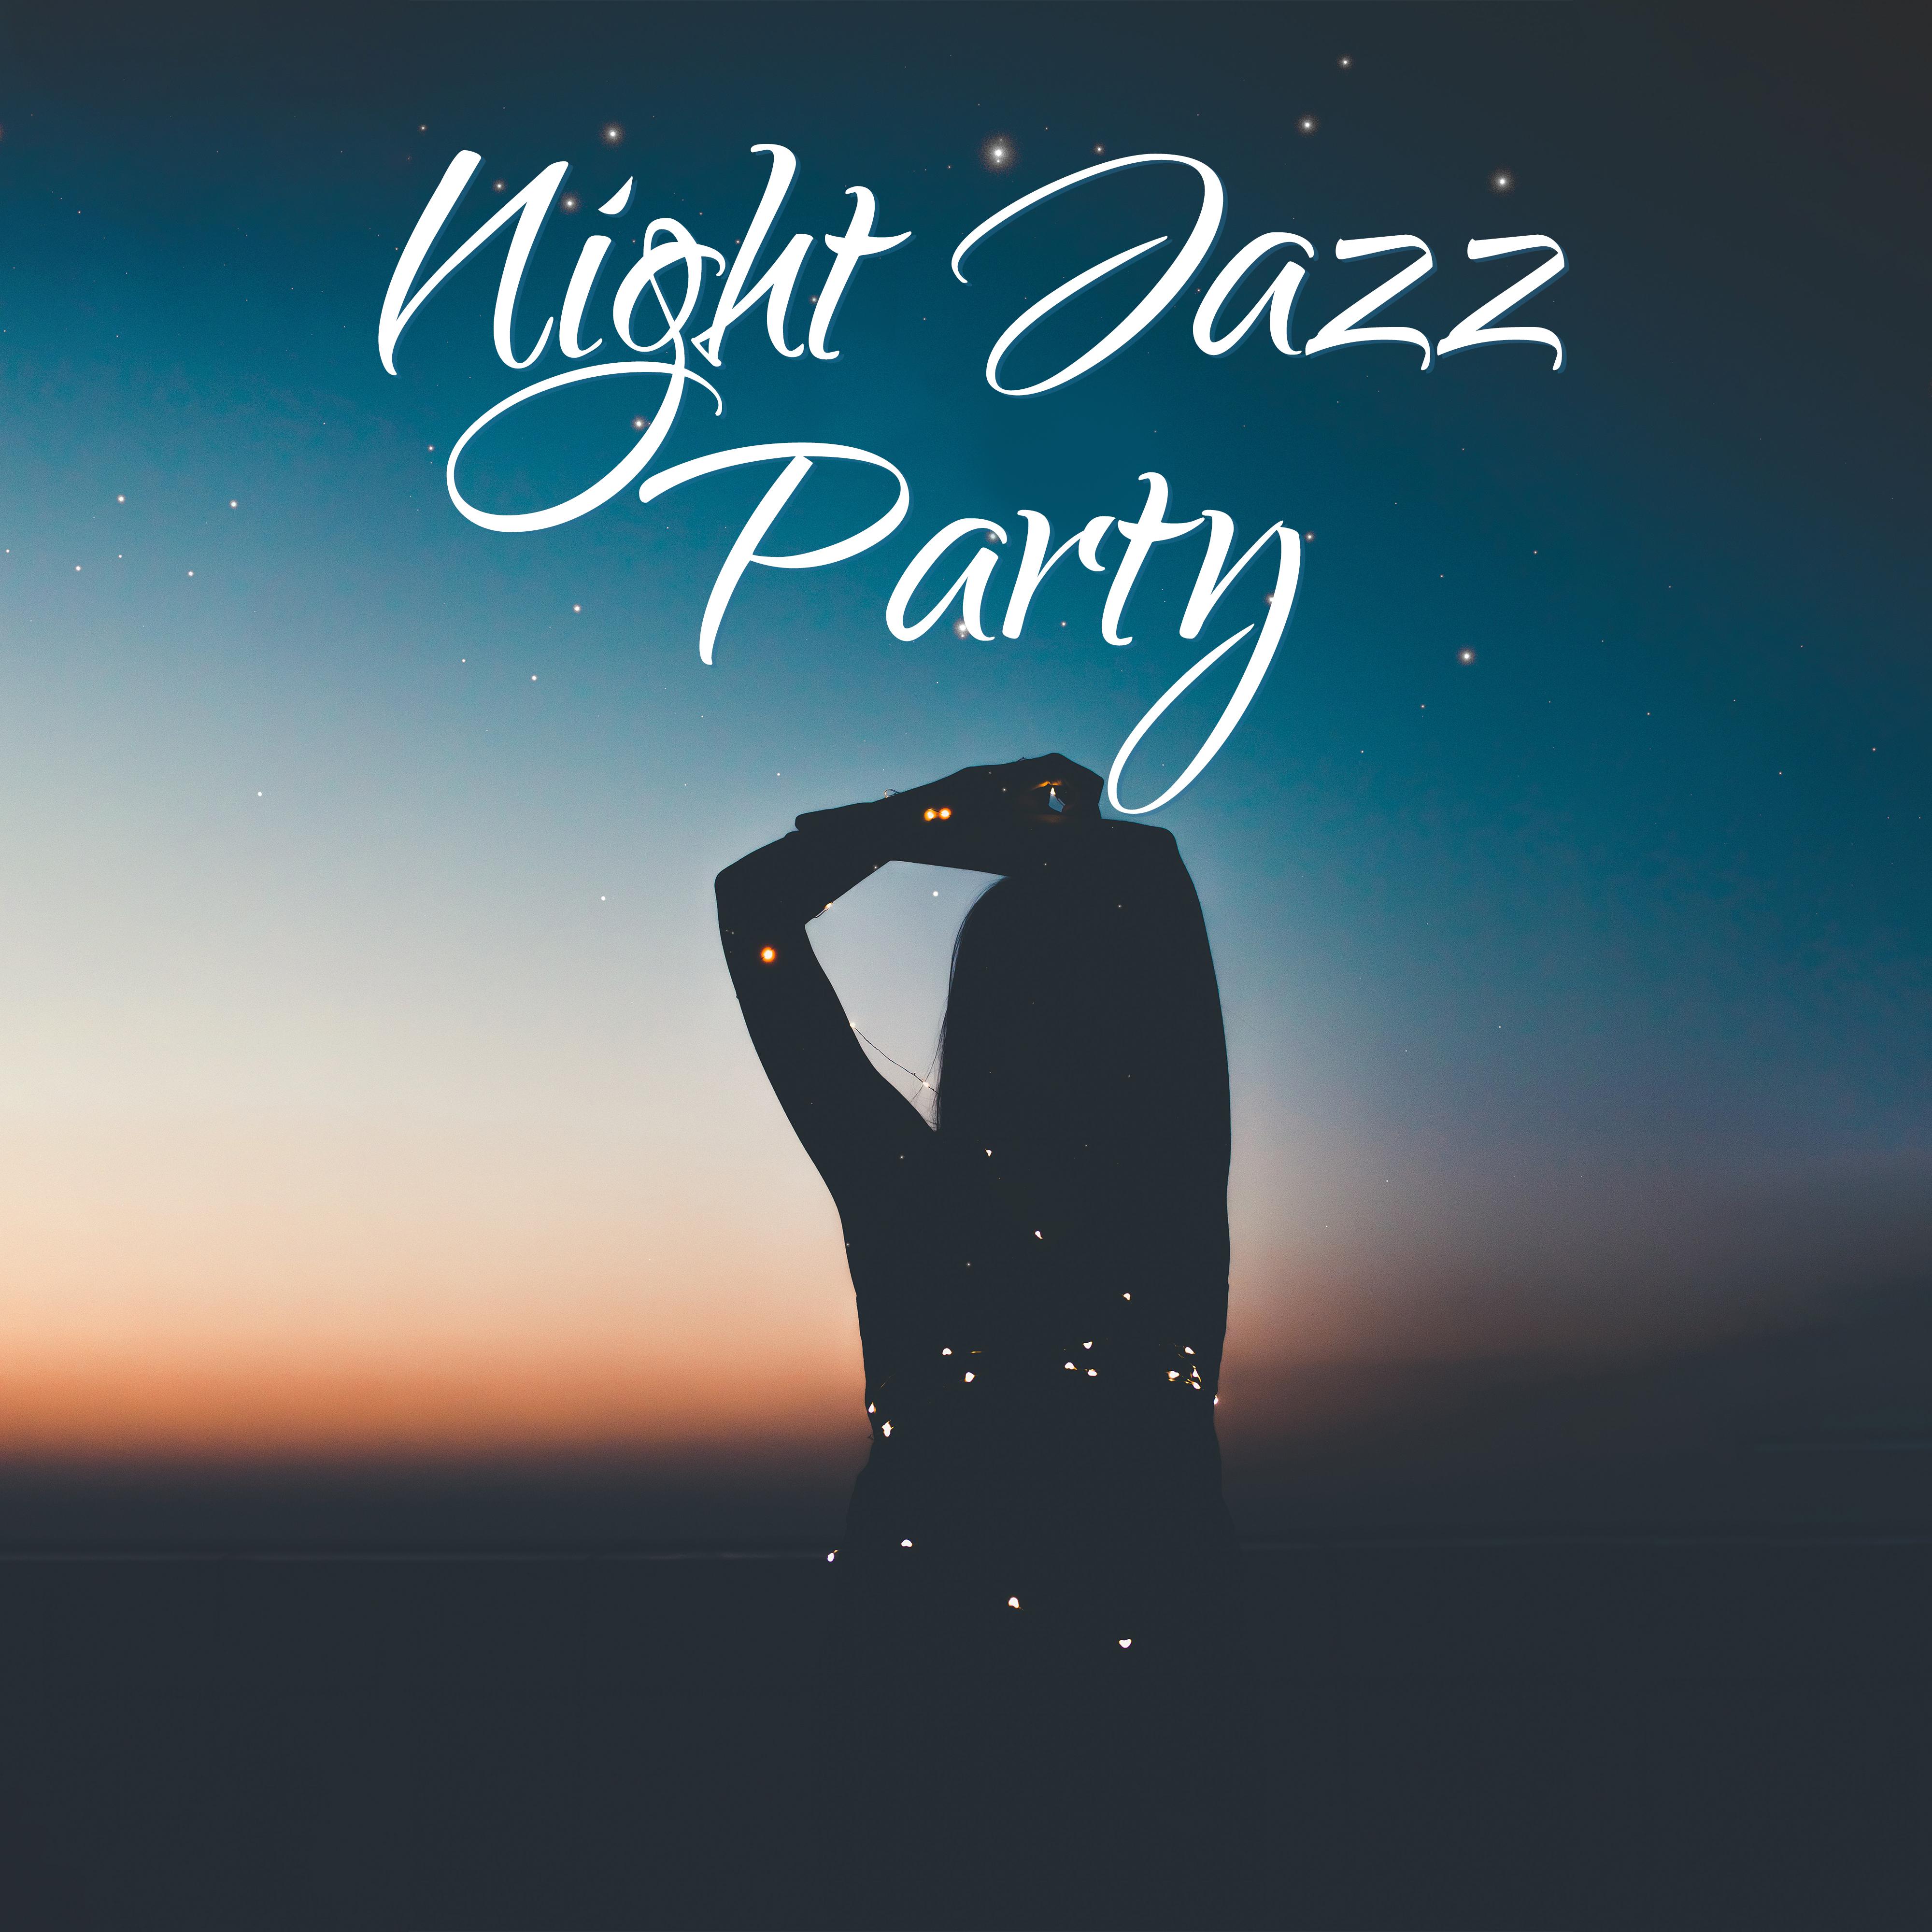 Night Jazz Party – Collection of Relaxing Jazz, Bar Lounge, Jazz Music Ambient, Party Hits, Instrumental Sounds After Work